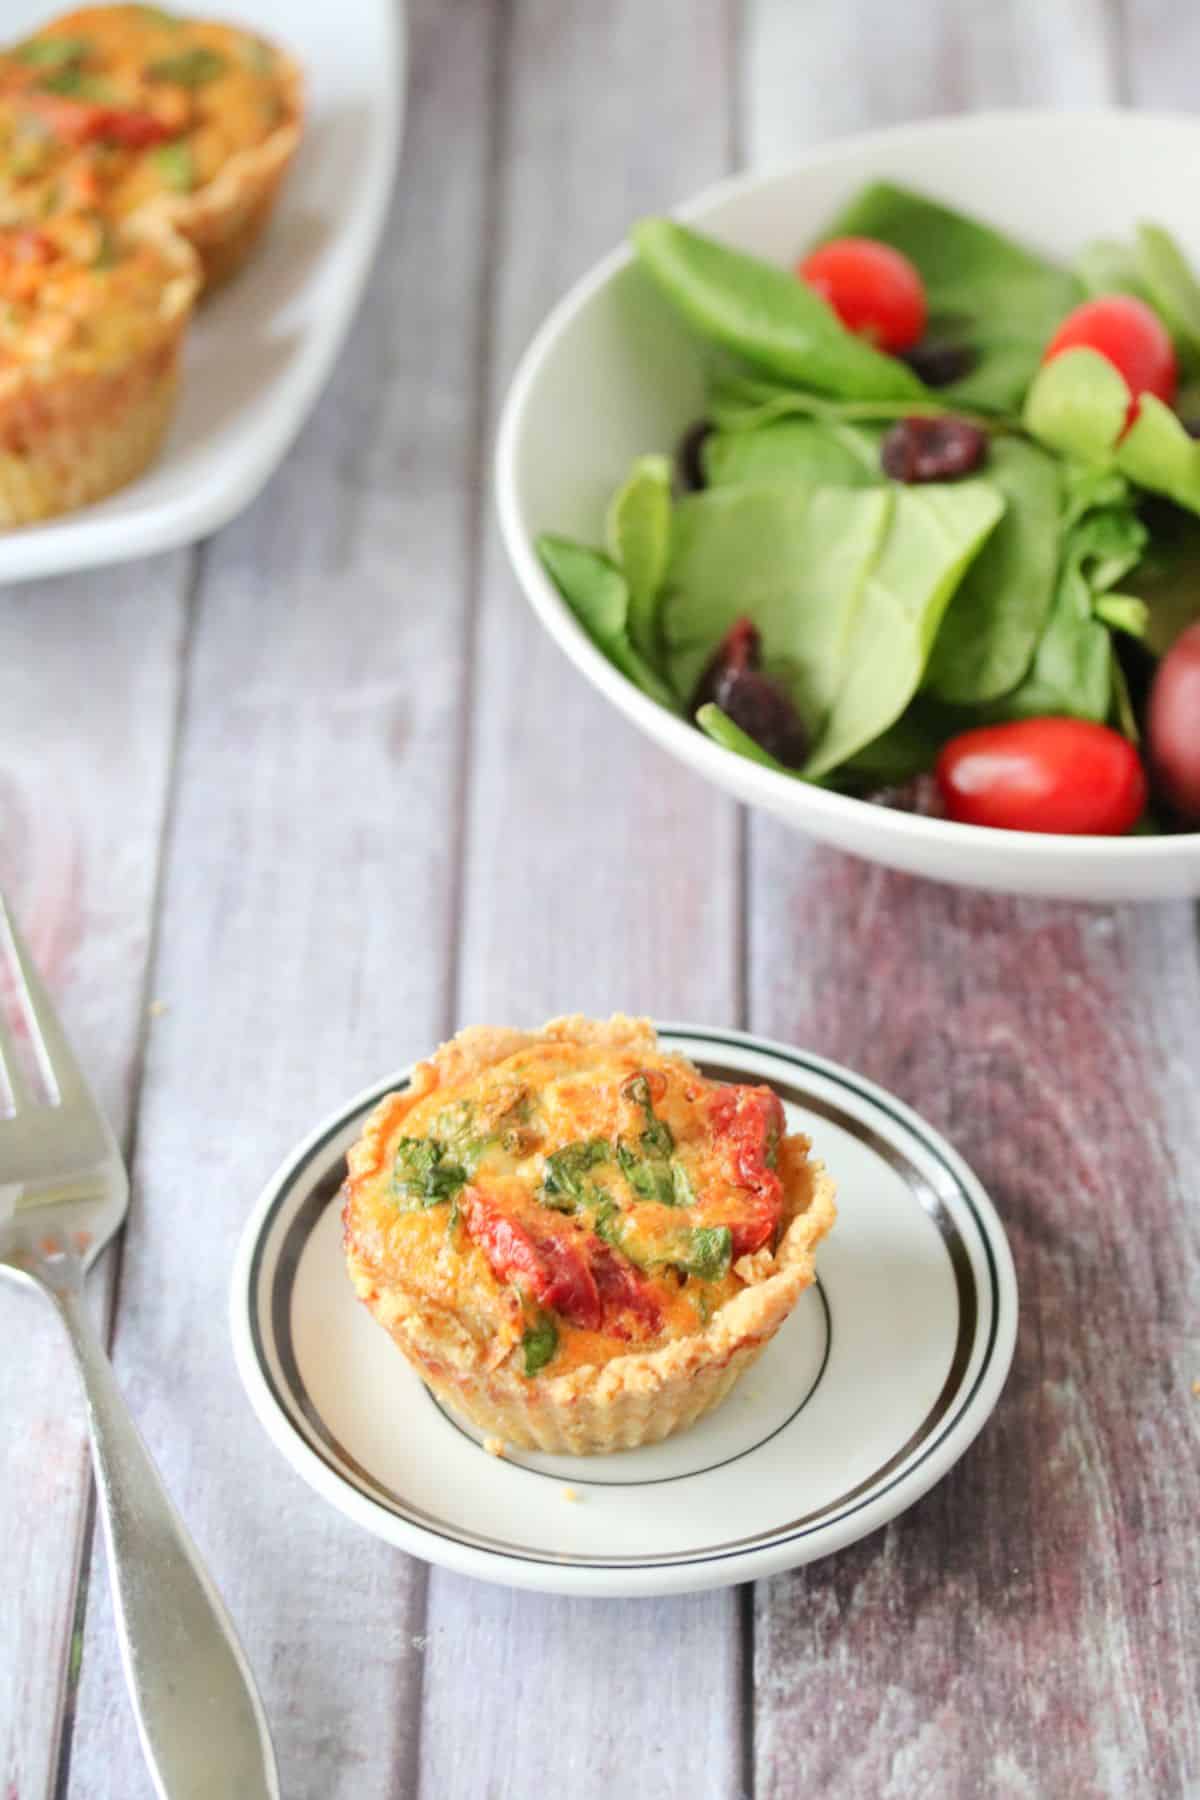 Spinach and mushroom quiche on a white plate with a form, more quiches stacked behind it and a bowl of salad.